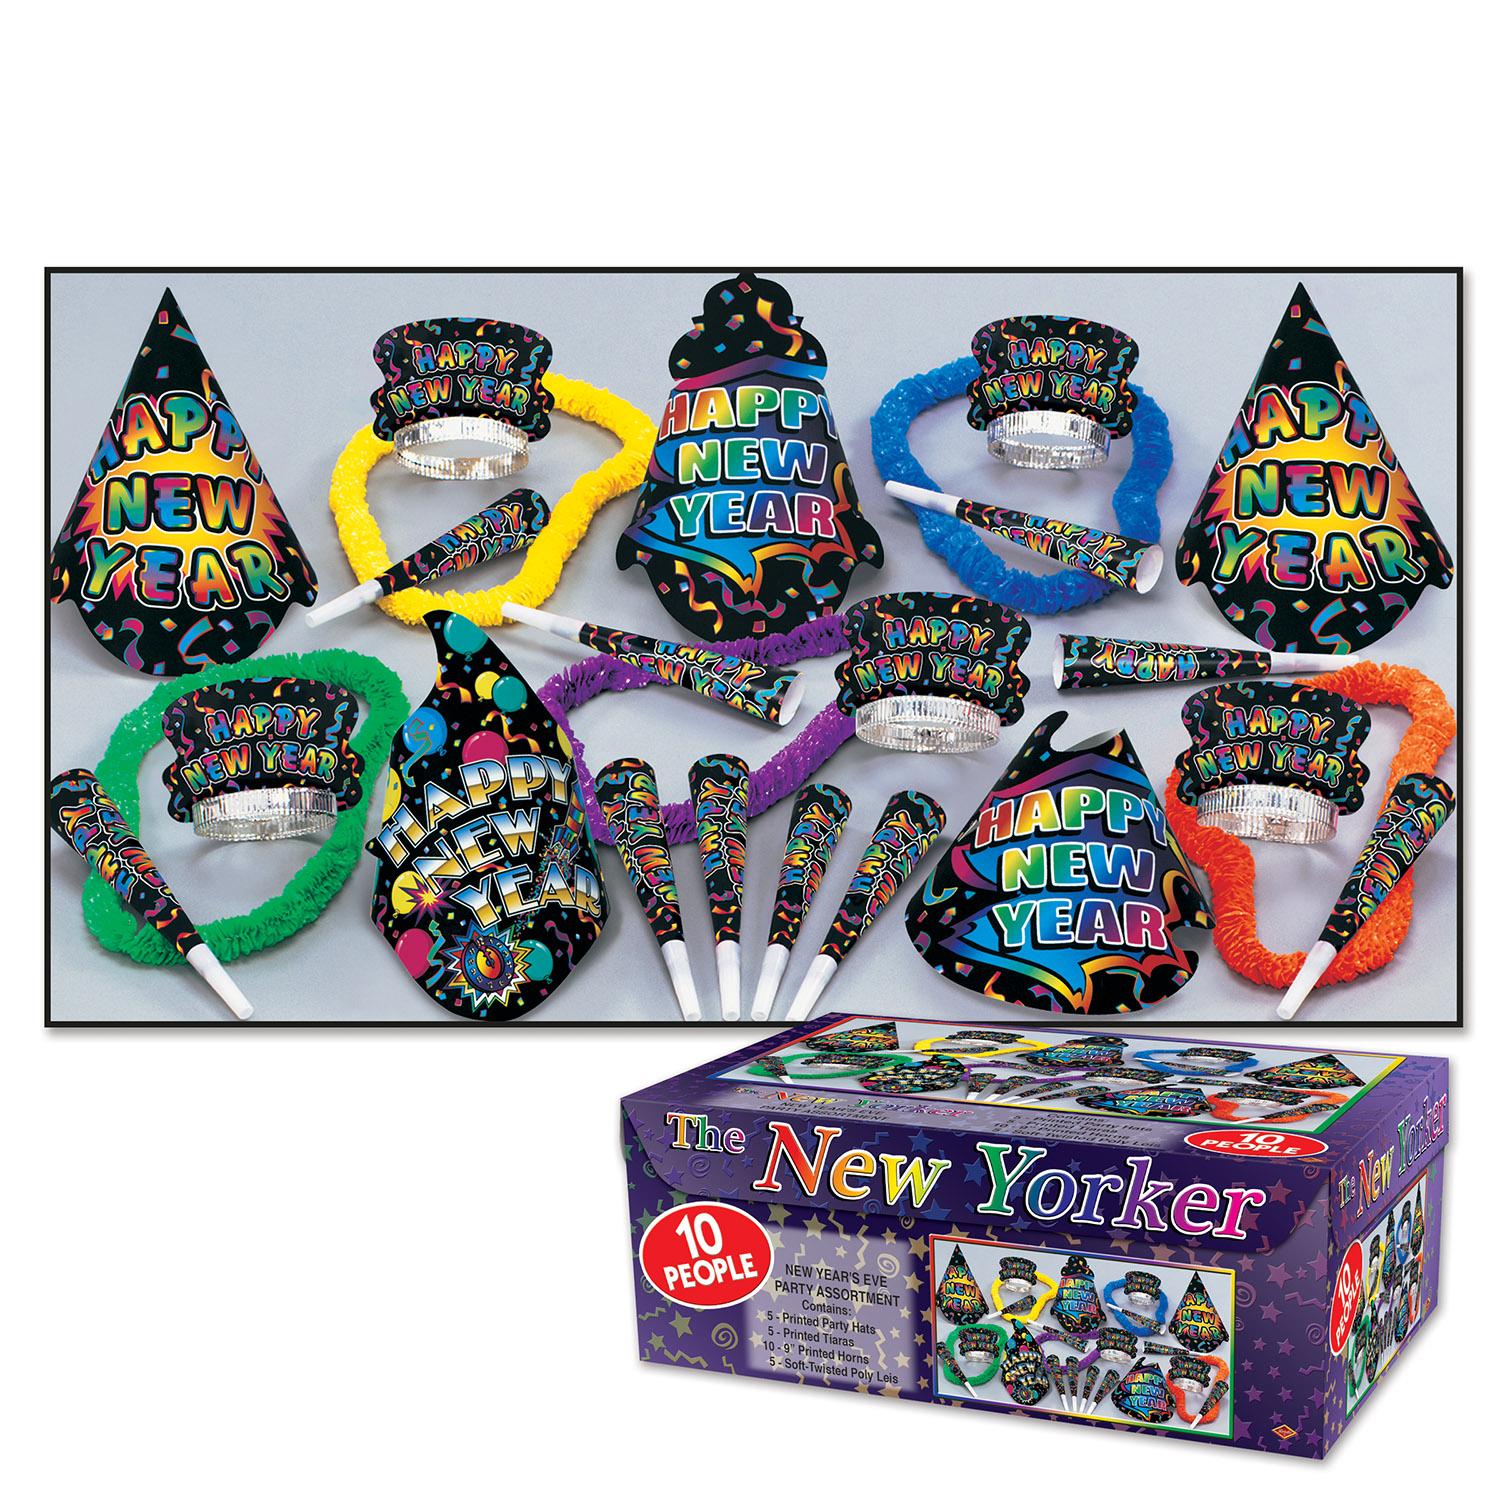 Beistle New Year's Eve New Yorker Party Kit for 10